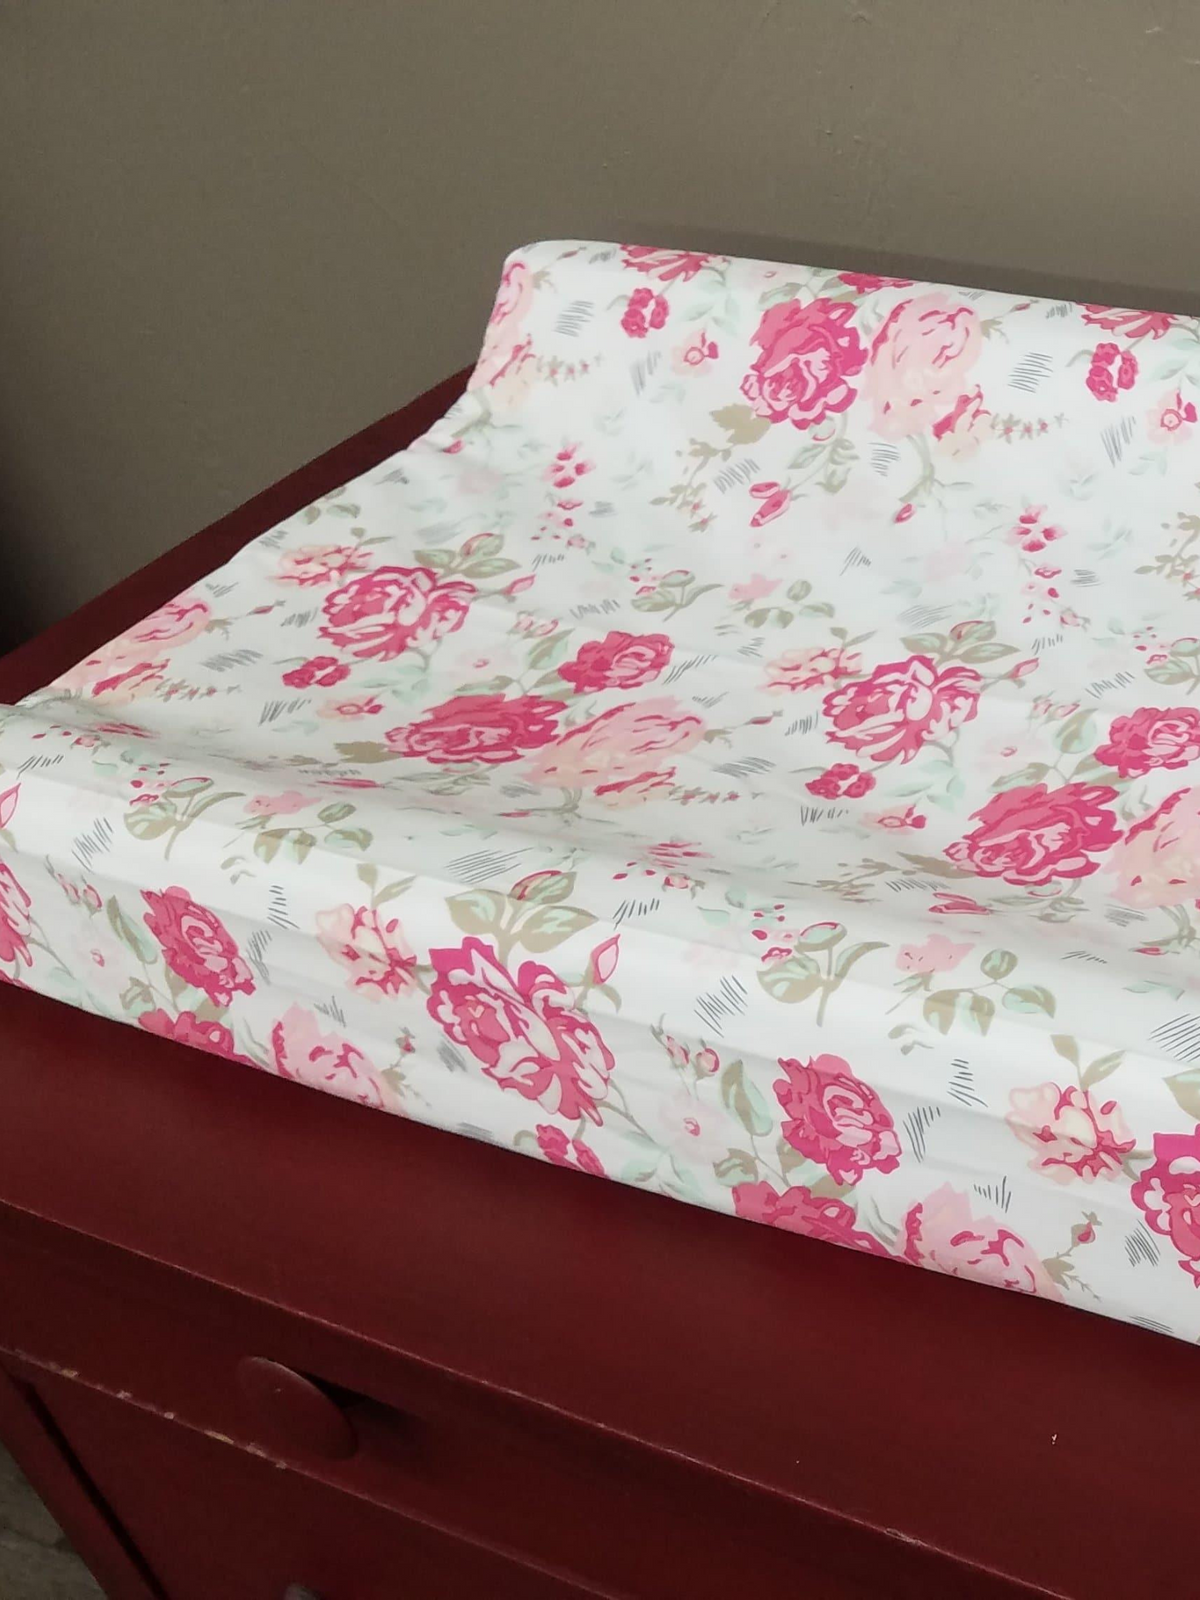 Changing Pad Cover - Romantic Roses Floral Cover - DBC Baby Bedding Co 